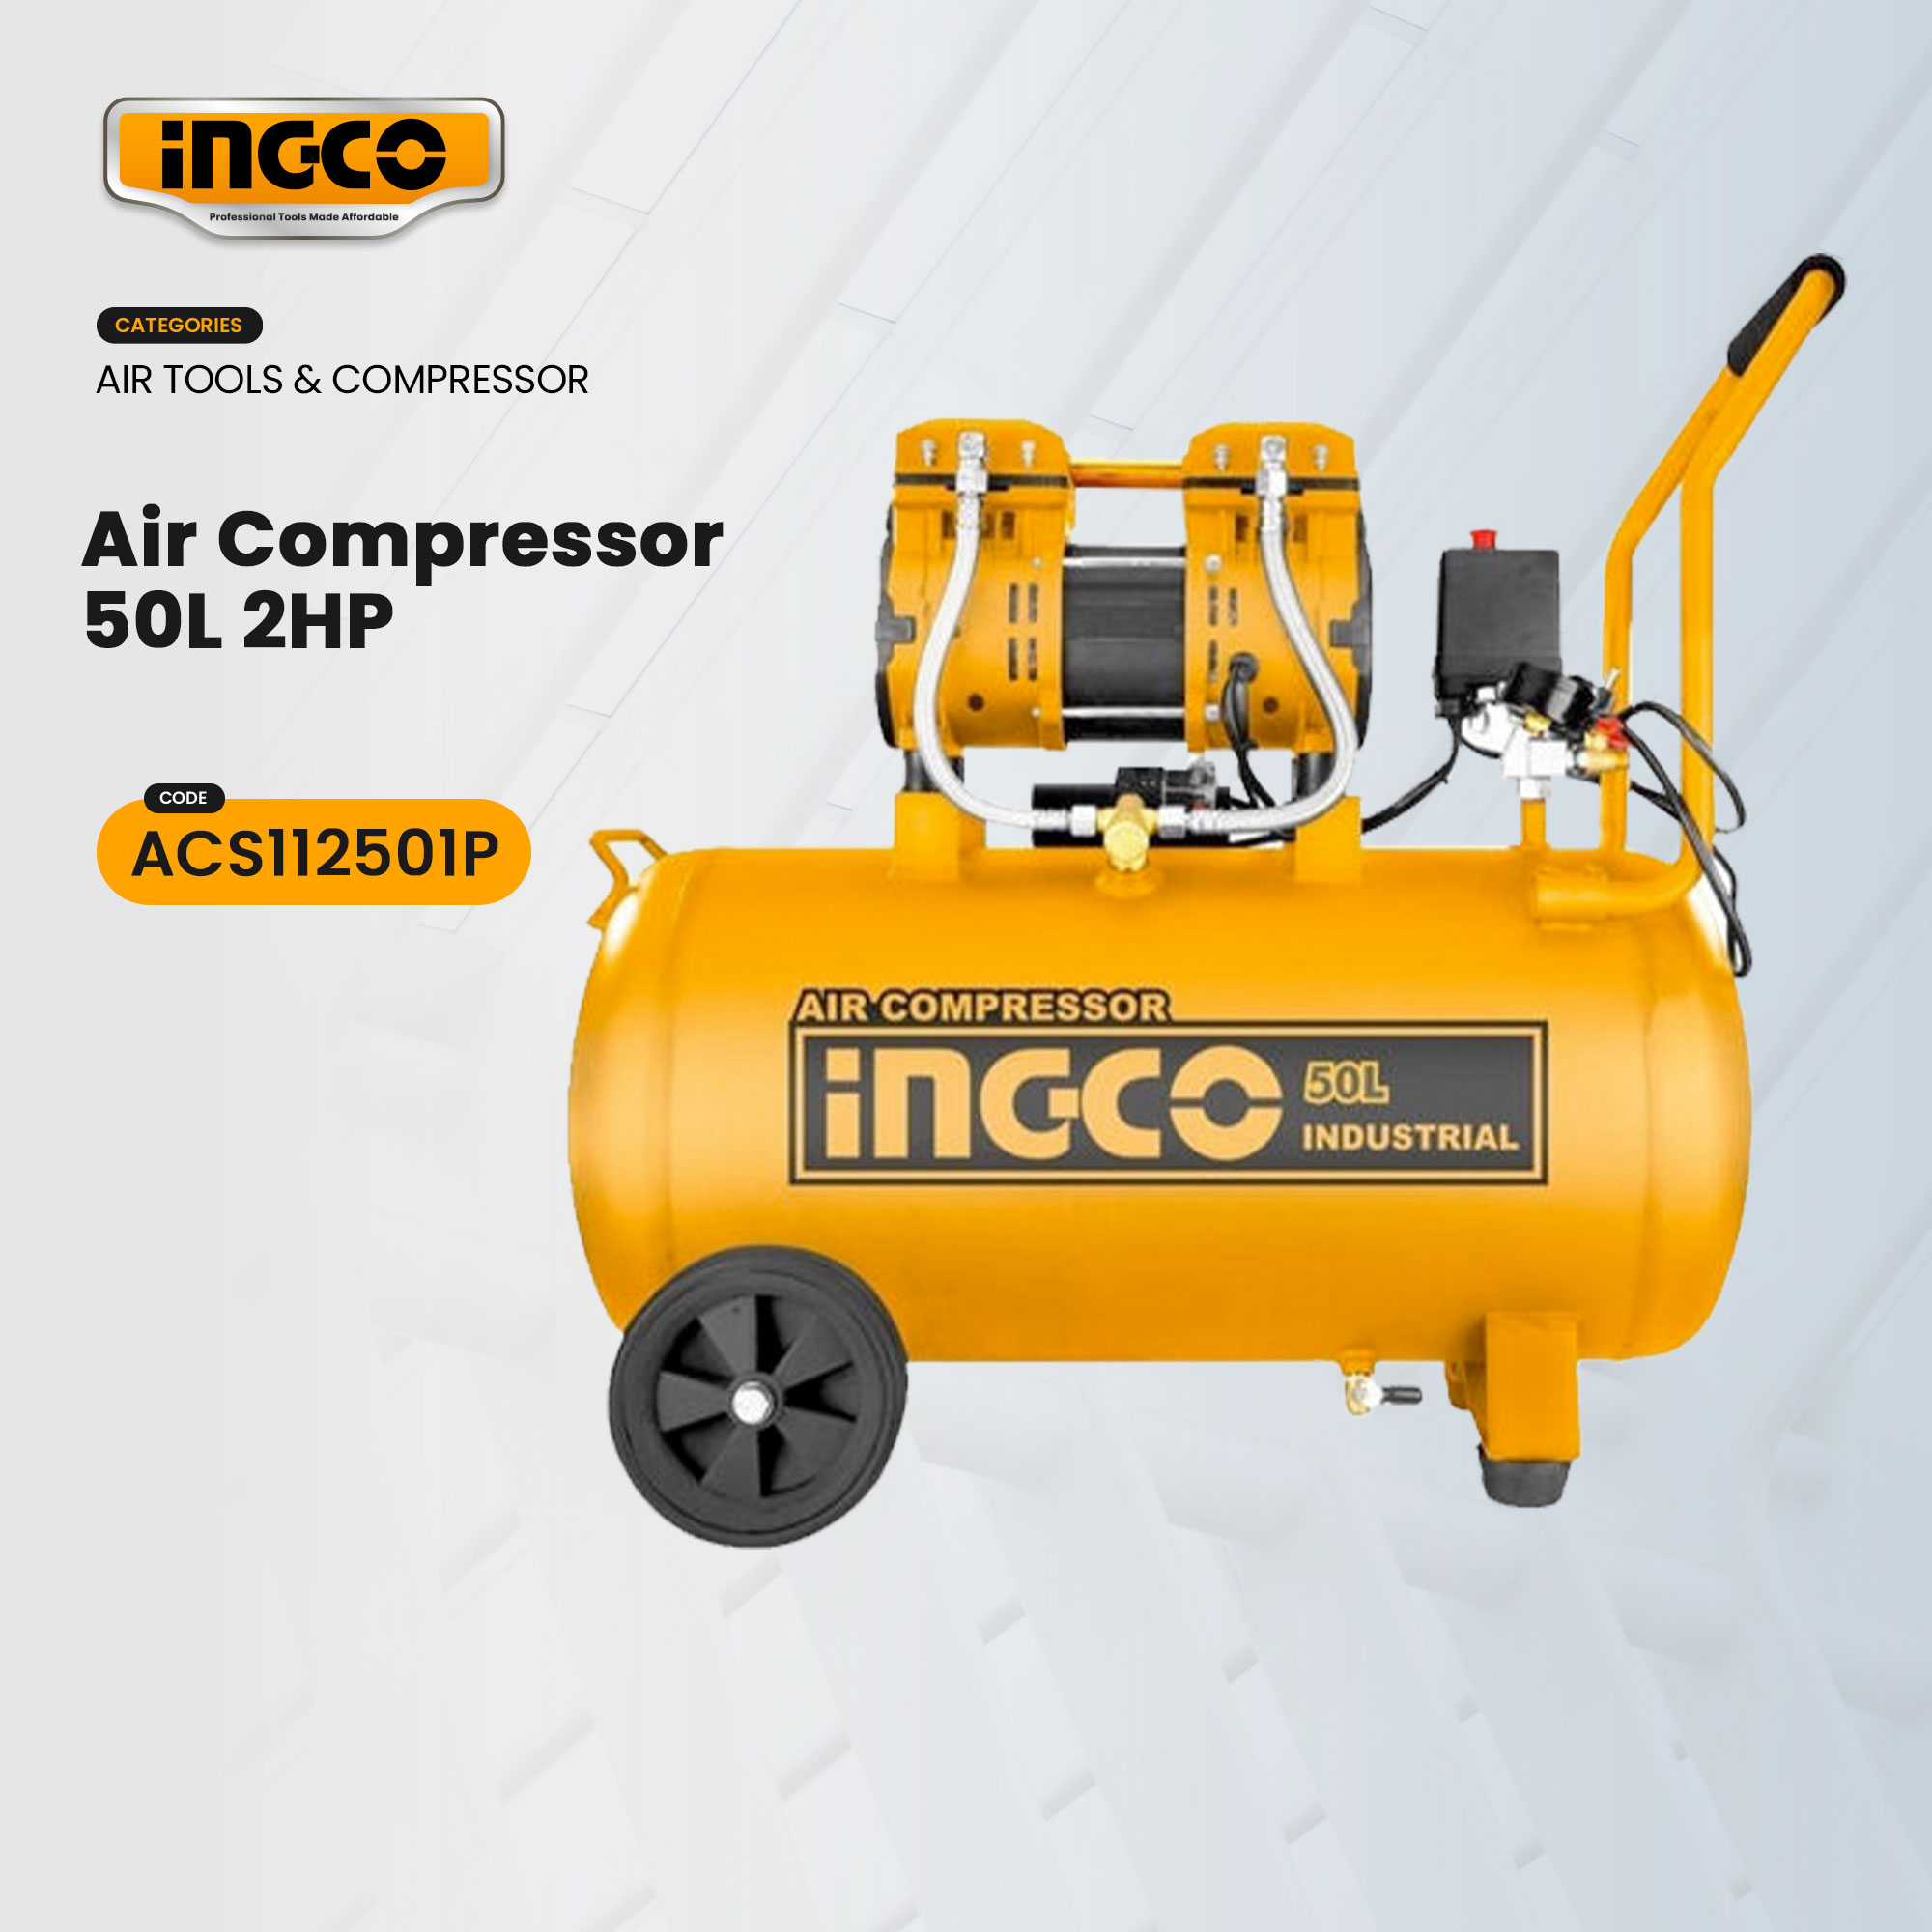 Ingco 50L Industrial Air Compressor with Oil Free System